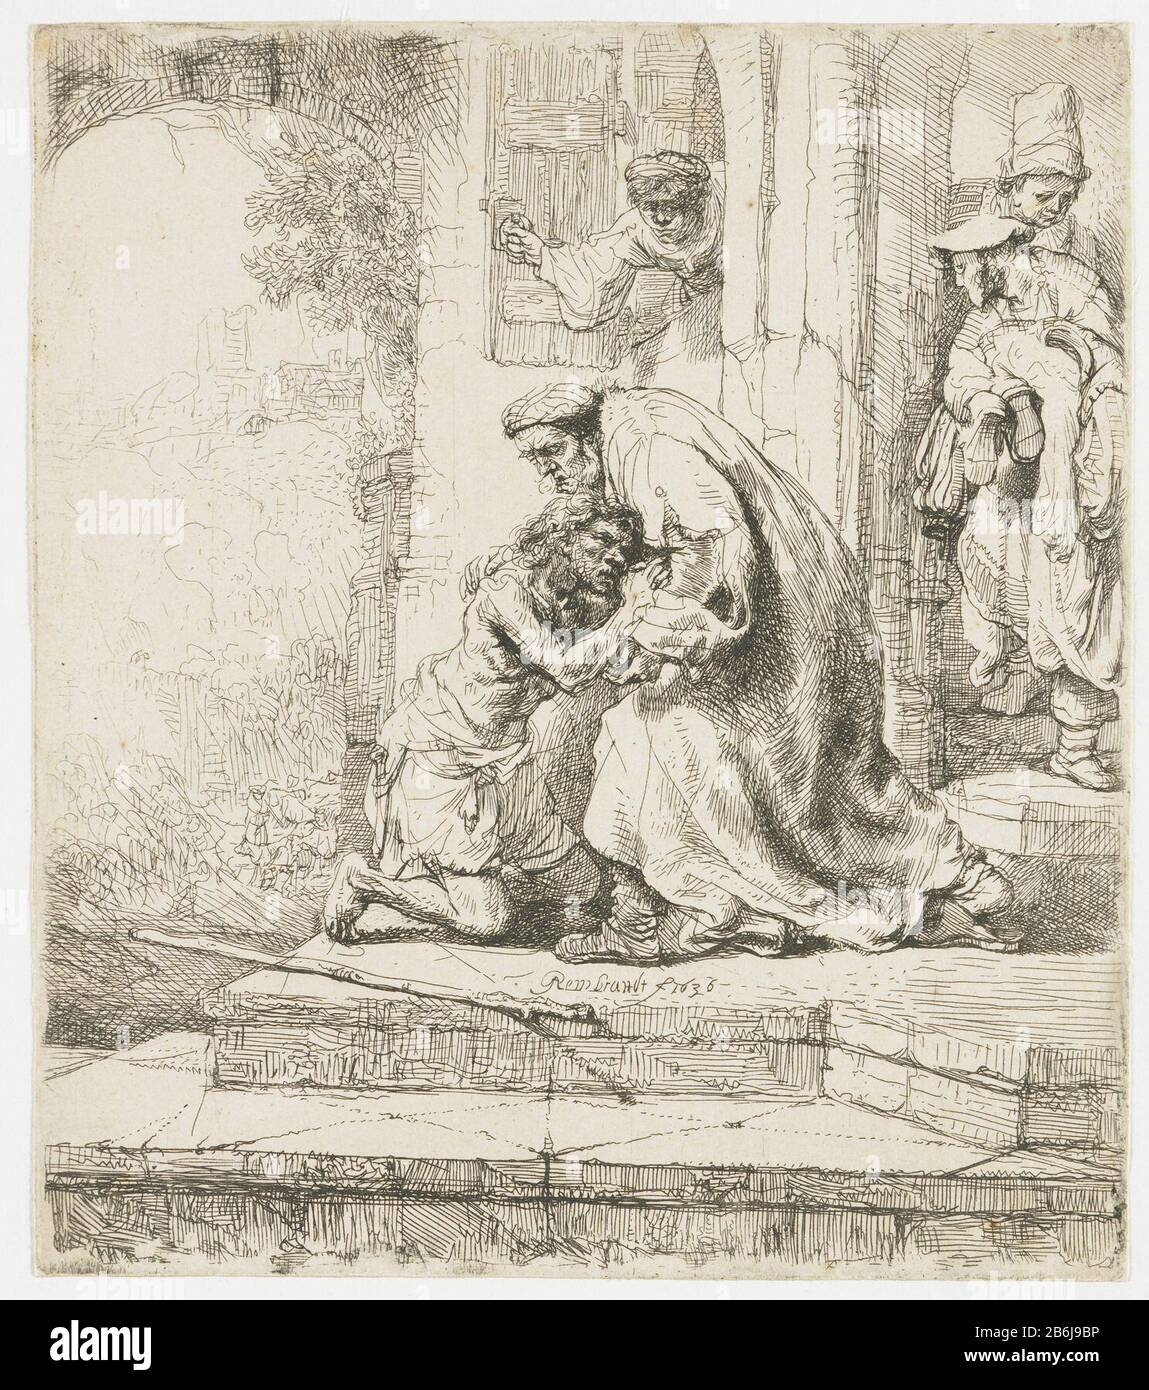 The return of the prodigal son the return of the prodigal son: he kneels before his father on the steps of his home. In the door opening two figures, in a third looks out the venster. Manufacturer : print maker: Rembrandt van Rijn (indicated on object) to his own design of Rembrandt van Rijn Date: 1636 Physical features: etching material: paper Technique: etching dimensions: h 156 mm × W 136 mm Subject: the parable of the prodigal son (Luke 15: 11-32) Stock Photo